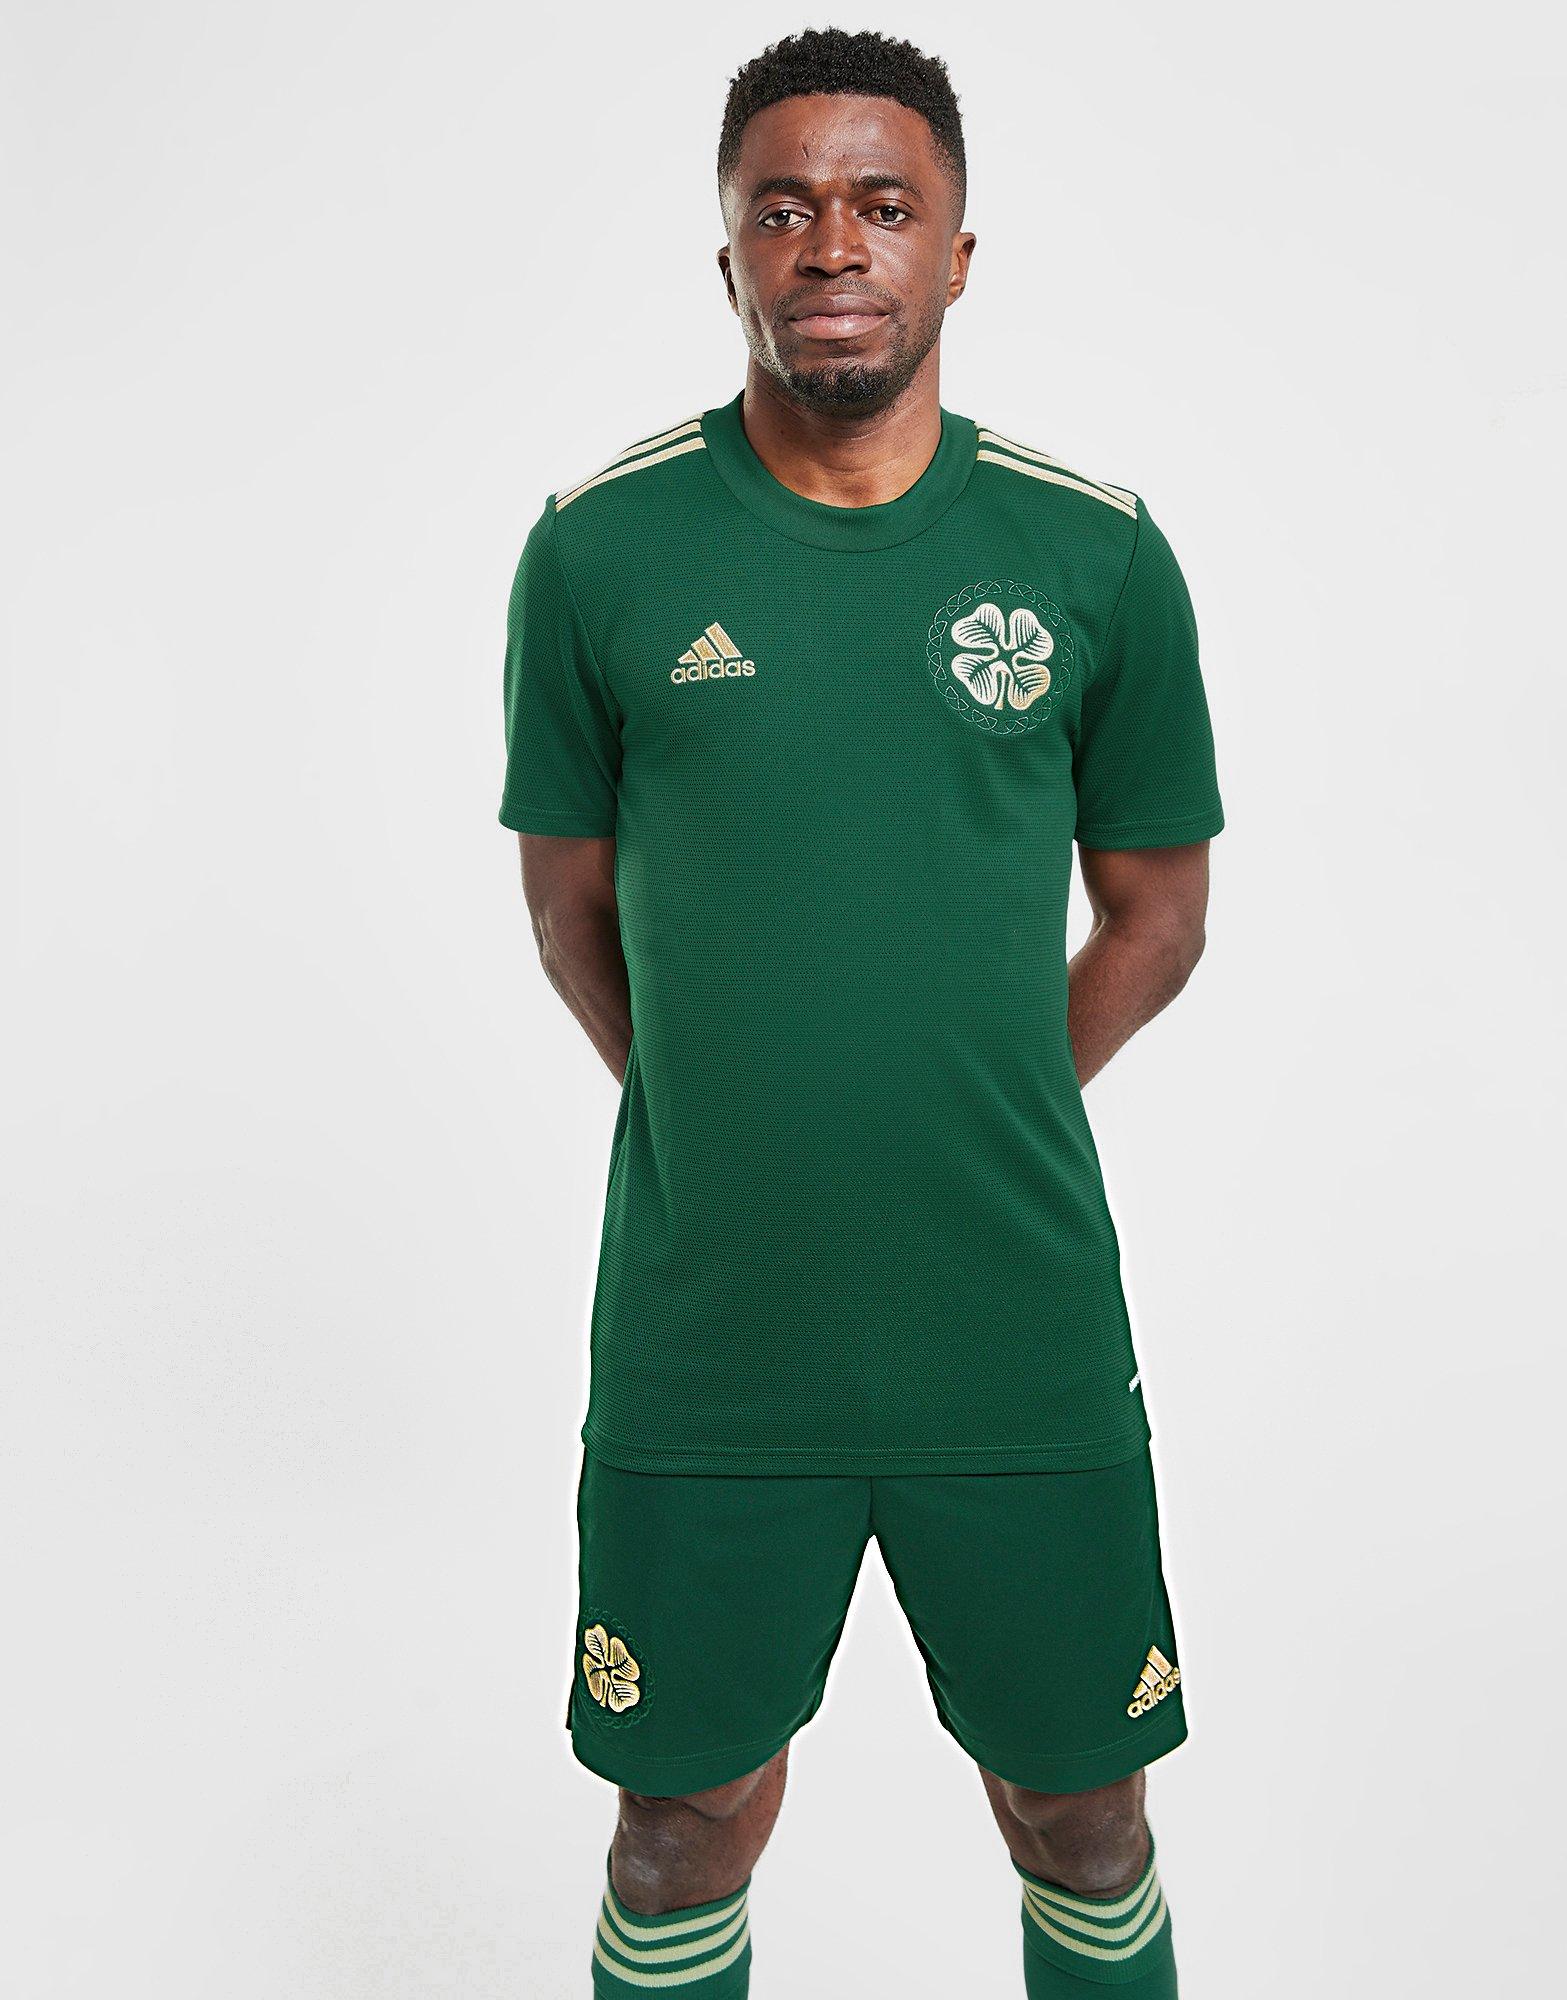 celtic away kit 2021 - OFF-69% > Shipping free